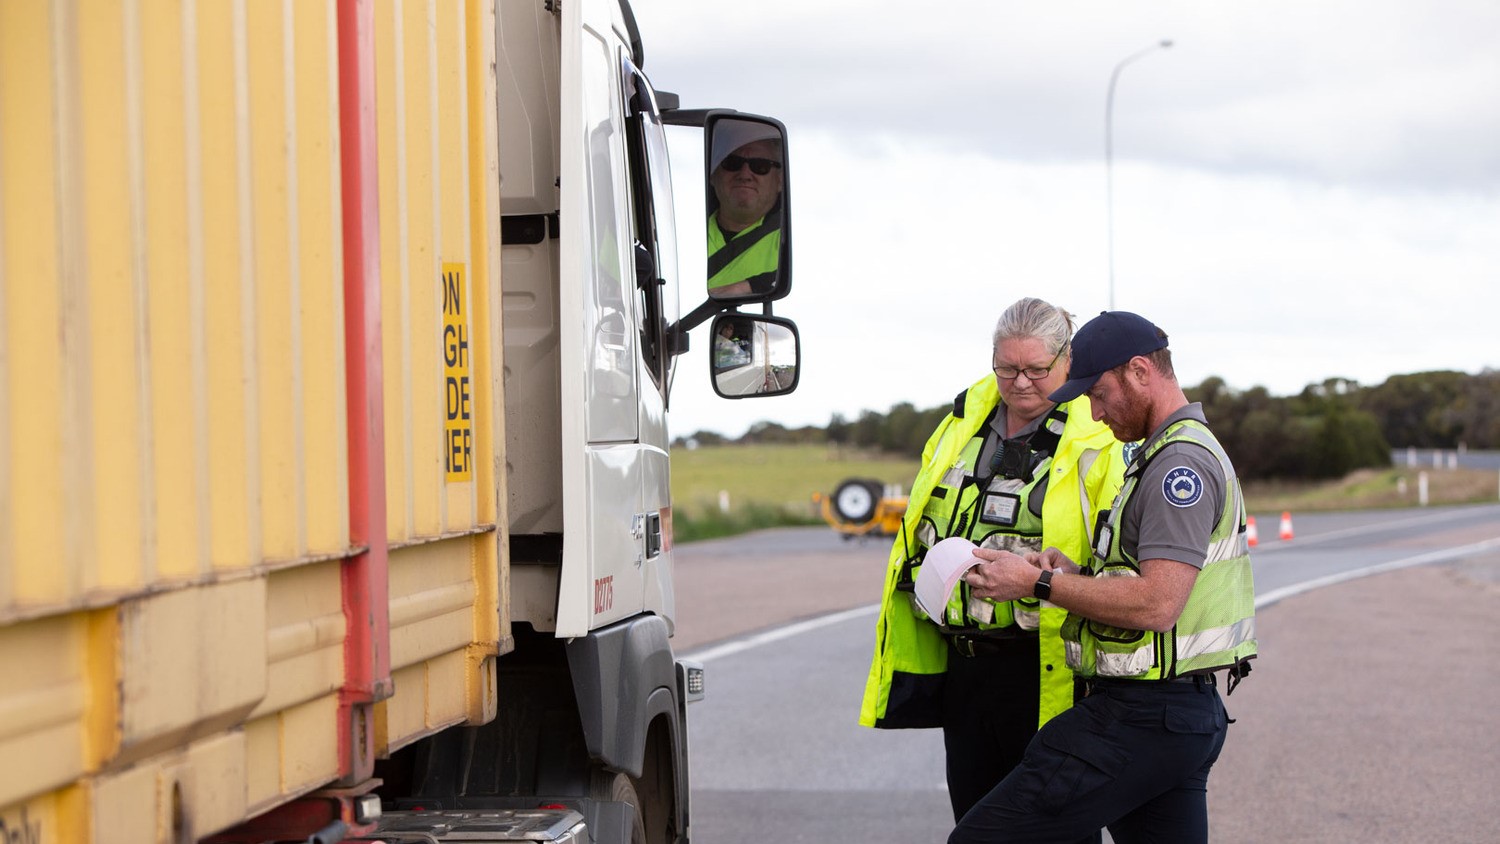 Two National Heavy Vehicle Regulator compliance officers holding paperwork check a large truck.